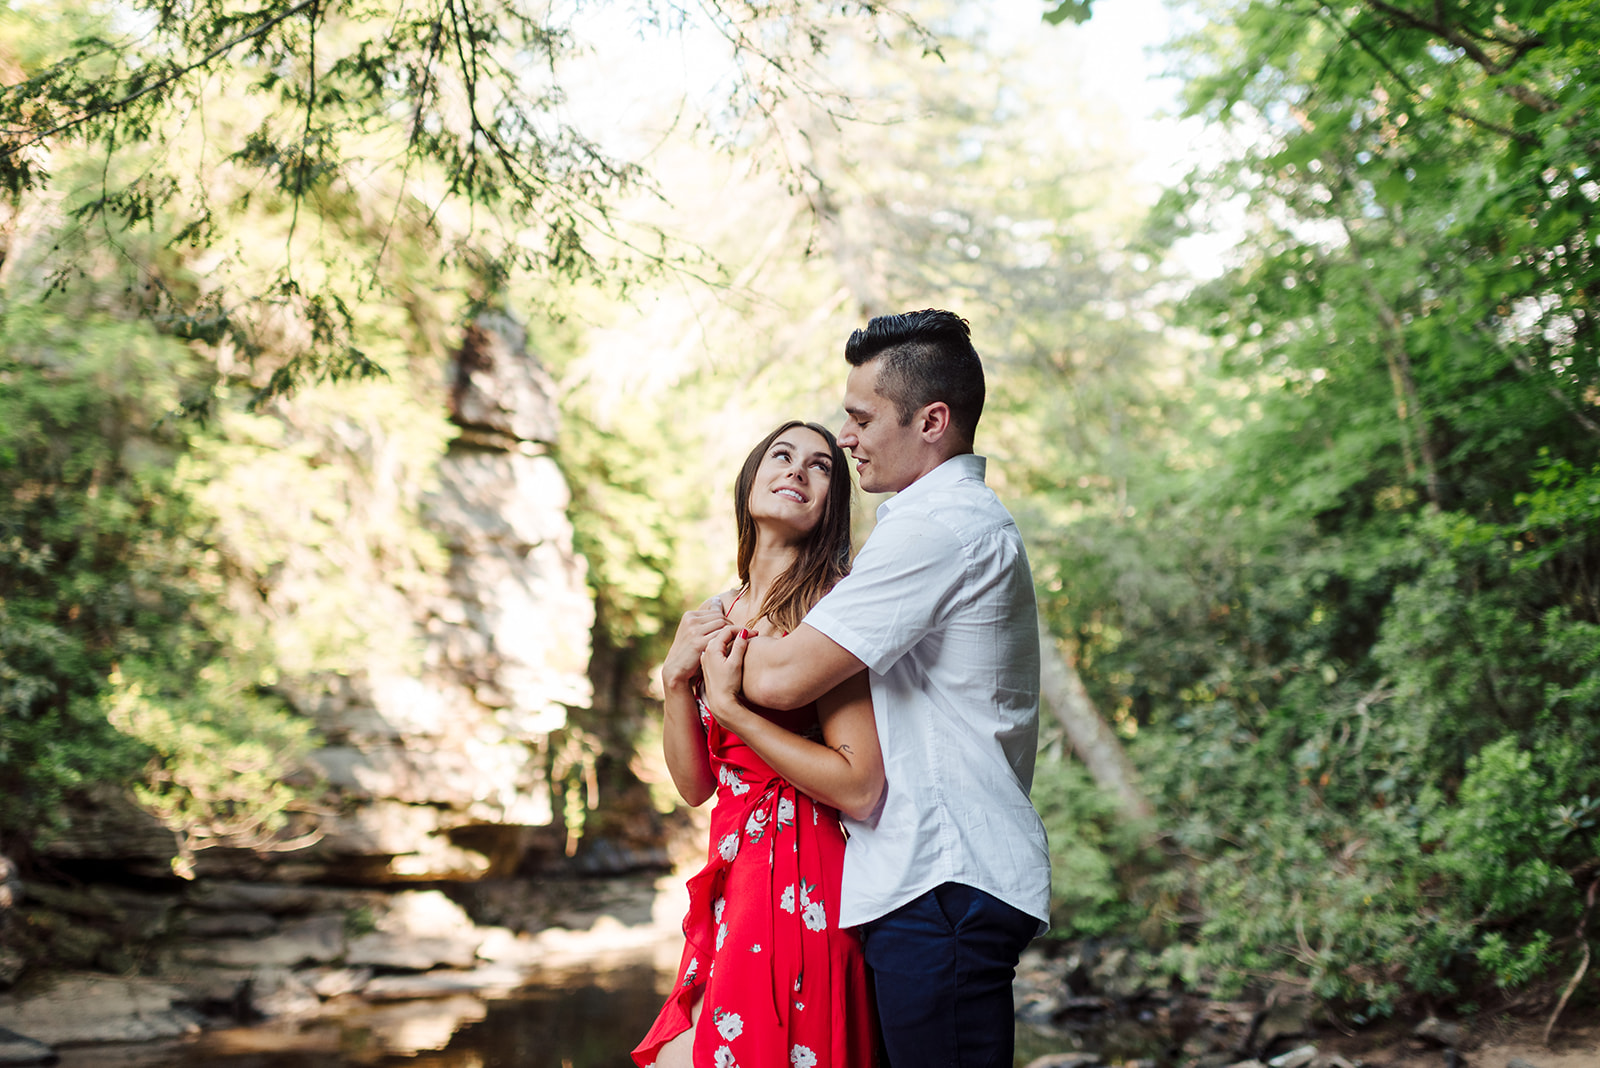 Waterfall engagement session featured on Nashville Bride Guide